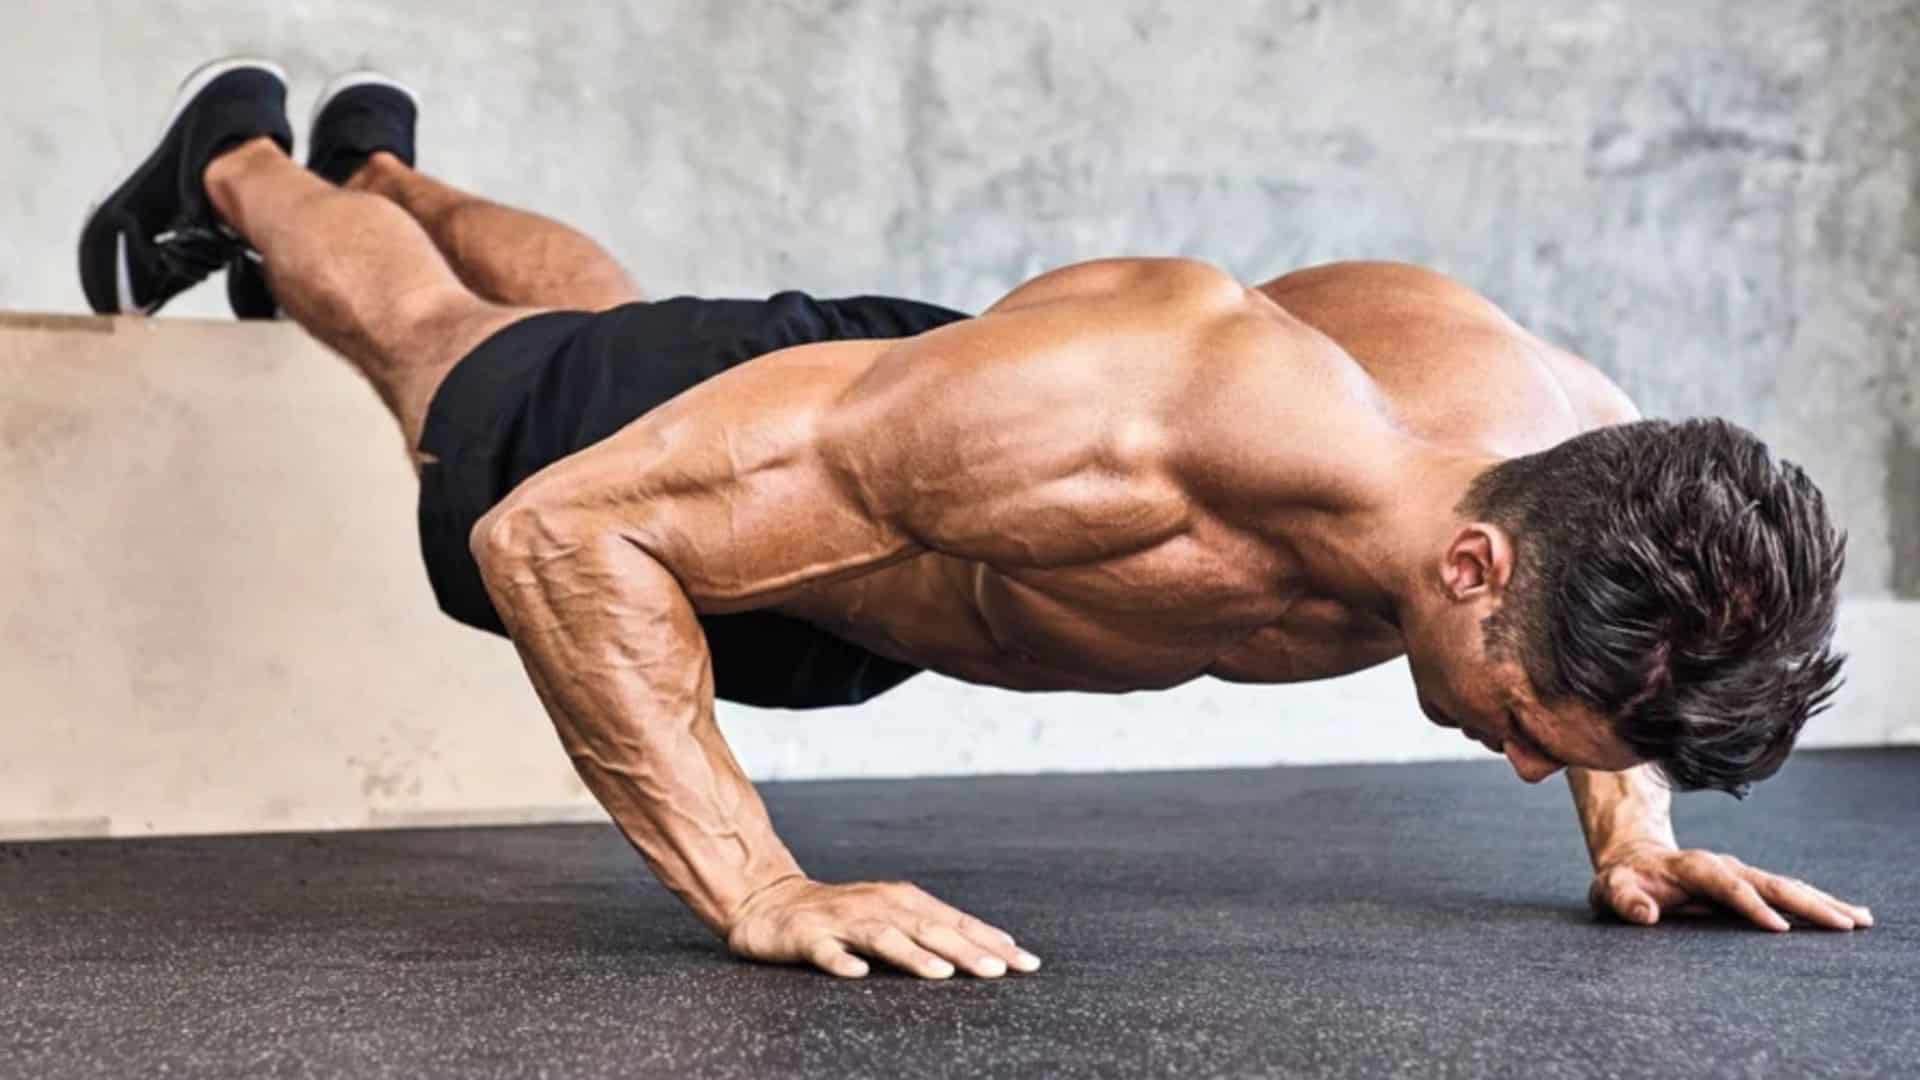 Upper Chest Bodyweight Workout That You Can Do at Home